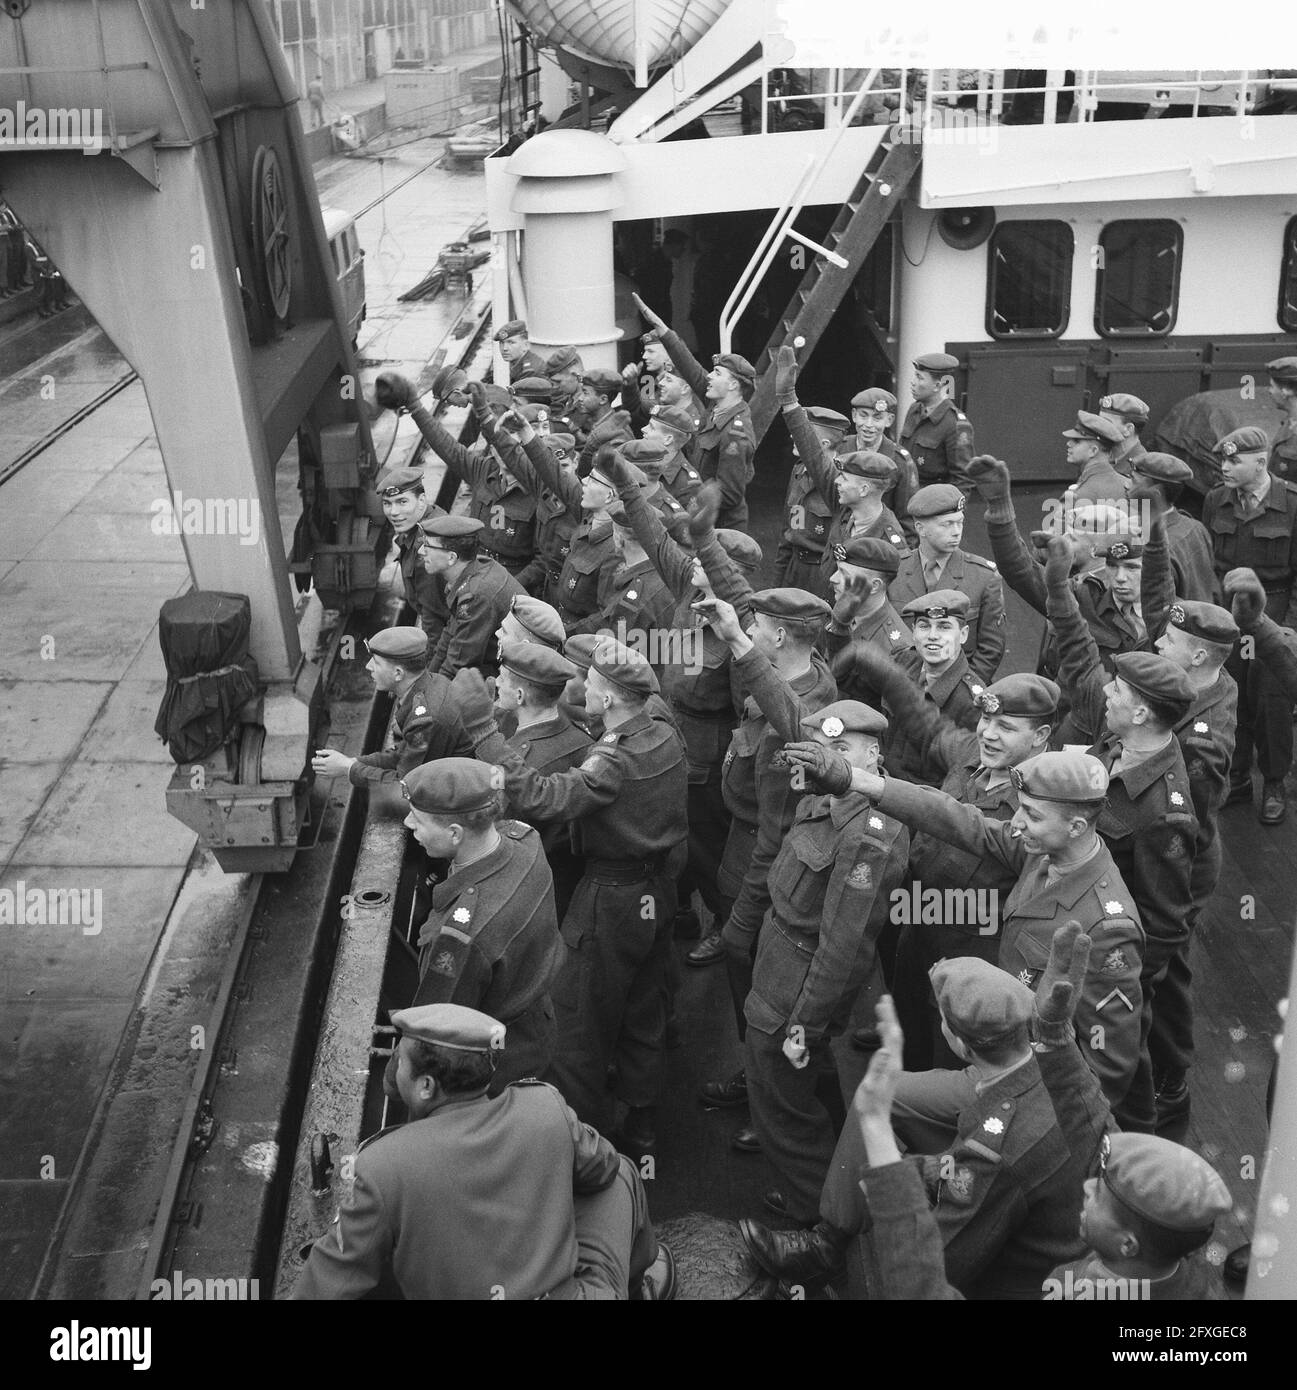 Departure of first detachment of the first Surinam company by Ms. Willemstad to Surinam, soldiers wave goodbye, January 13, 1961, FAREFARE, COMPAGNIES, DETACHMENTS, SOLDATES, The Netherlands, 20th century press agency photo, news to remember, documentary, historic photography 1945-1990, visual stories, human history of the Twentieth Century, capturing moments in time Stock Photo